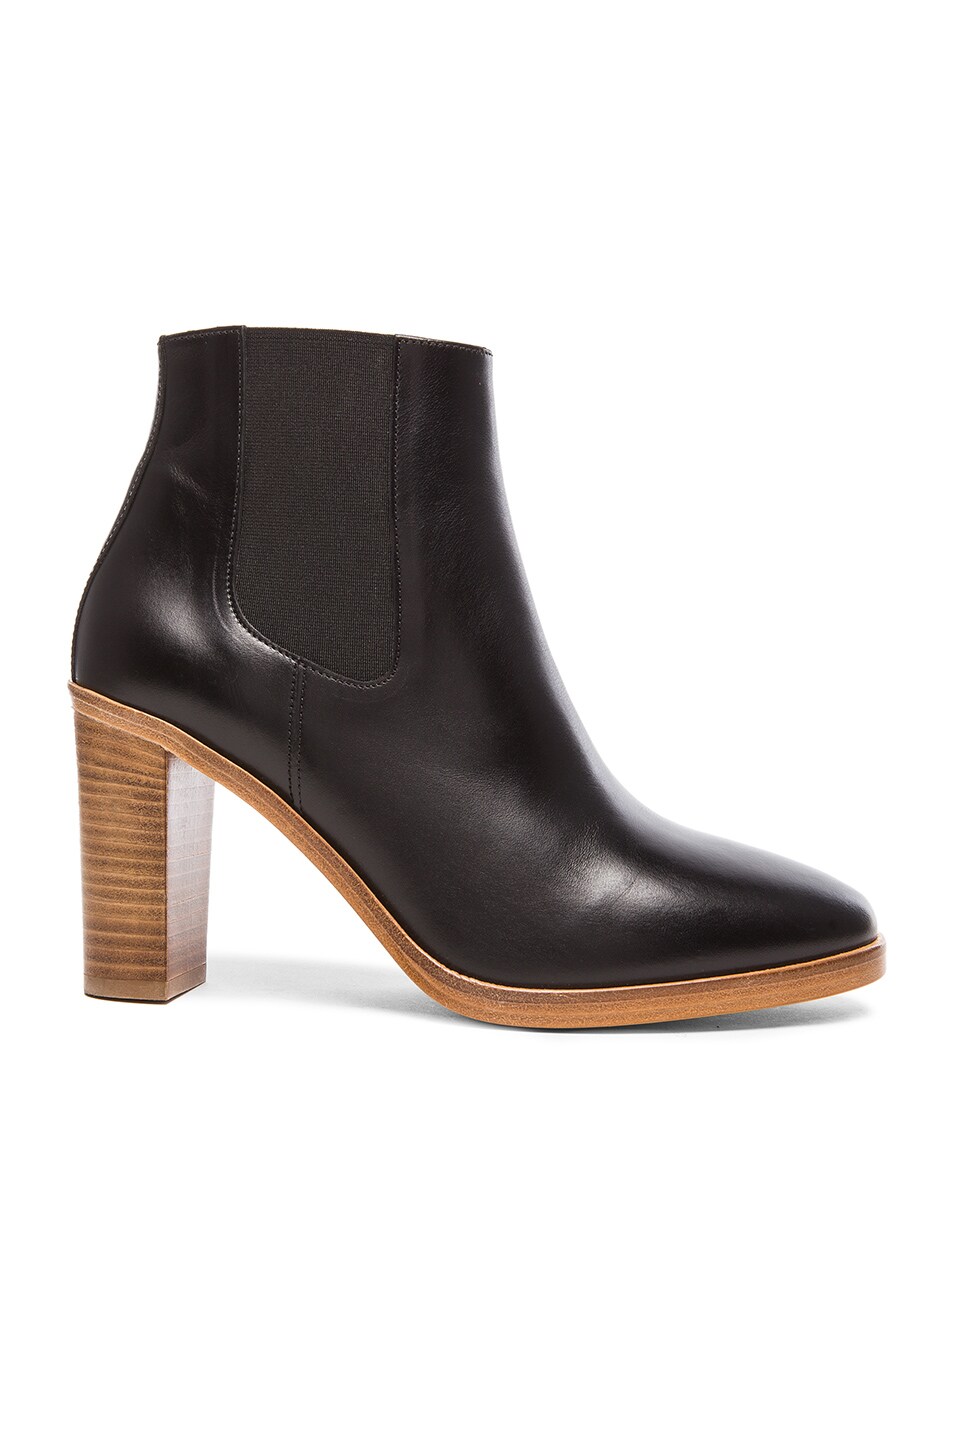 Image 1 of A.P.C. Fleurus Leather Booties in Black